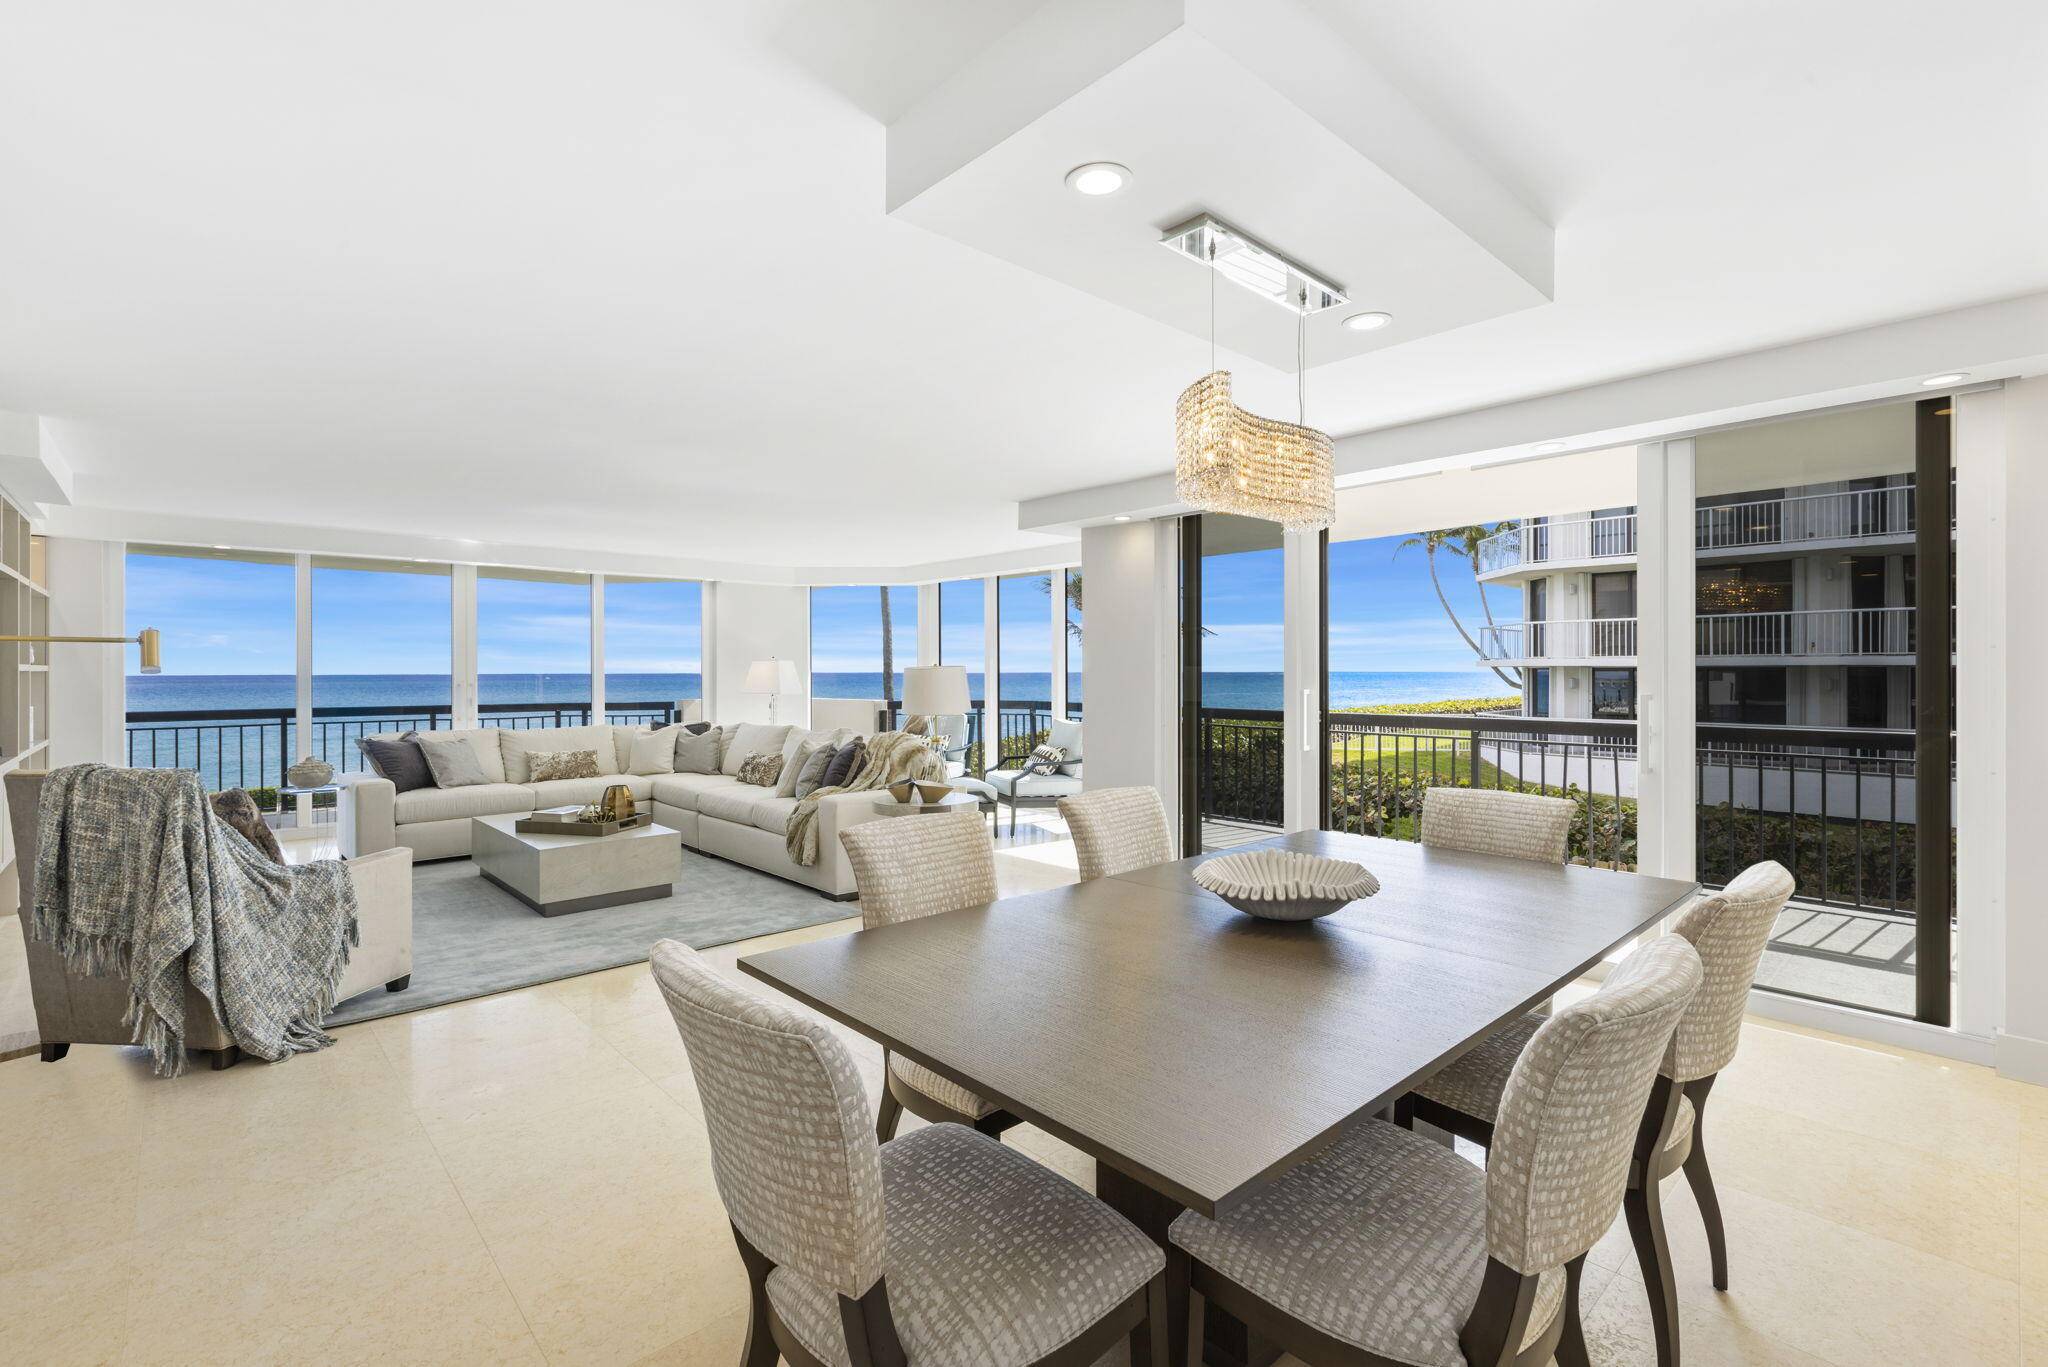 Discover perfection in this newly renovated condo, offering breathtaking ocean views from the southeast wraparound terrace.